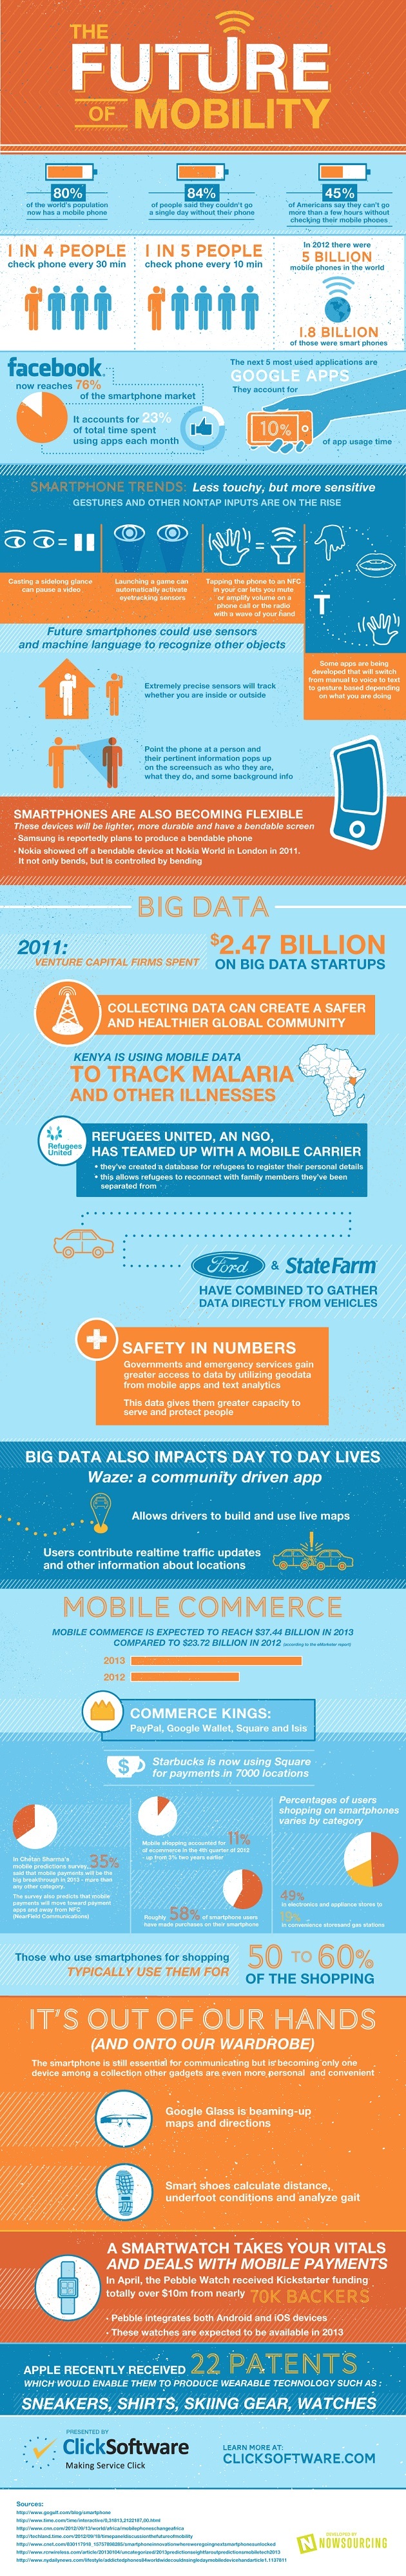 389361-infographic-the-future-of-mobility